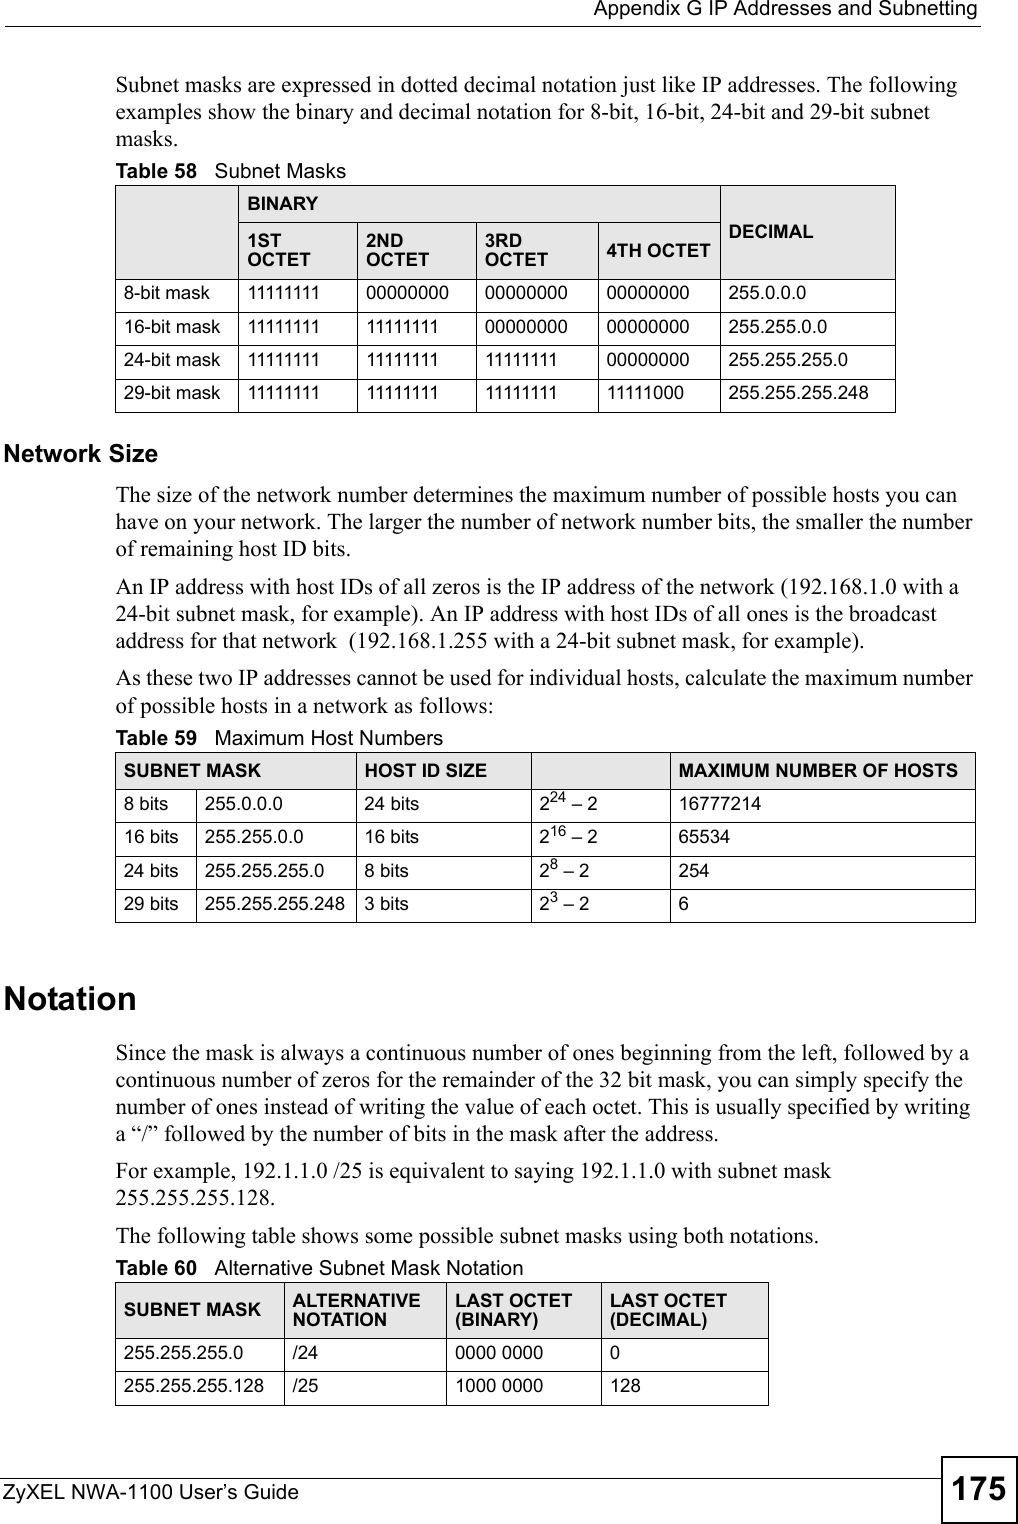  Appendix G IP Addresses and SubnettingZyXEL NWA-1100 User’s Guide 175Subnet masks are expressed in dotted decimal notation just like IP addresses. The following examples show the binary and decimal notation for 8-bit, 16-bit, 24-bit and 29-bit subnet masks. Network SizeThe size of the network number determines the maximum number of possible hosts you can have on your network. The larger the number of network number bits, the smaller the number of remaining host ID bits. An IP address with host IDs of all zeros is the IP address of the network (192.168.1.0 with a 24-bit subnet mask, for example). An IP address with host IDs of all ones is the broadcast address for that network  (192.168.1.255 with a 24-bit subnet mask, for example).As these two IP addresses cannot be used for individual hosts, calculate the maximum number of possible hosts in a network as follows:NotationSince the mask is always a continuous number of ones beginning from the left, followed by a continuous number of zeros for the remainder of the 32 bit mask, you can simply specify the number of ones instead of writing the value of each octet. This is usually specified by writing a “/” followed by the number of bits in the mask after the address. For example, 192.1.1.0 /25 is equivalent to saying 192.1.1.0 with subnet mask 255.255.255.128. The following table shows some possible subnet masks using both notations. Table 58   Subnet MasksBINARYDECIMAL1ST OCTET2ND OCTET3RD OCTET 4TH OCTET8-bit mask 11111111 00000000 00000000 00000000 255.0.0.016-bit mask 11111111 11111111 00000000 00000000 255.255.0.024-bit mask 11111111 11111111 11111111 00000000 255.255.255.029-bit mask 11111111 11111111 11111111 11111000 255.255.255.248Table 59   Maximum Host NumbersSUBNET MASK HOST ID SIZE MAXIMUM NUMBER OF HOSTS8 bits 255.0.0.0 24 bits 224 – 2 1677721416 bits 255.255.0.0 16 bits 216 – 2 6553424 bits 255.255.255.0 8 bits 28 – 2 25429 bits 255.255.255.248 3 bits 23 – 2 6Table 60   Alternative Subnet Mask NotationSUBNET MASK ALTERNATIVE NOTATIONLAST OCTET (BINARY)LAST OCTET (DECIMAL)255.255.255.0 /24 0000 0000 0255.255.255.128 /25 1000 0000 128